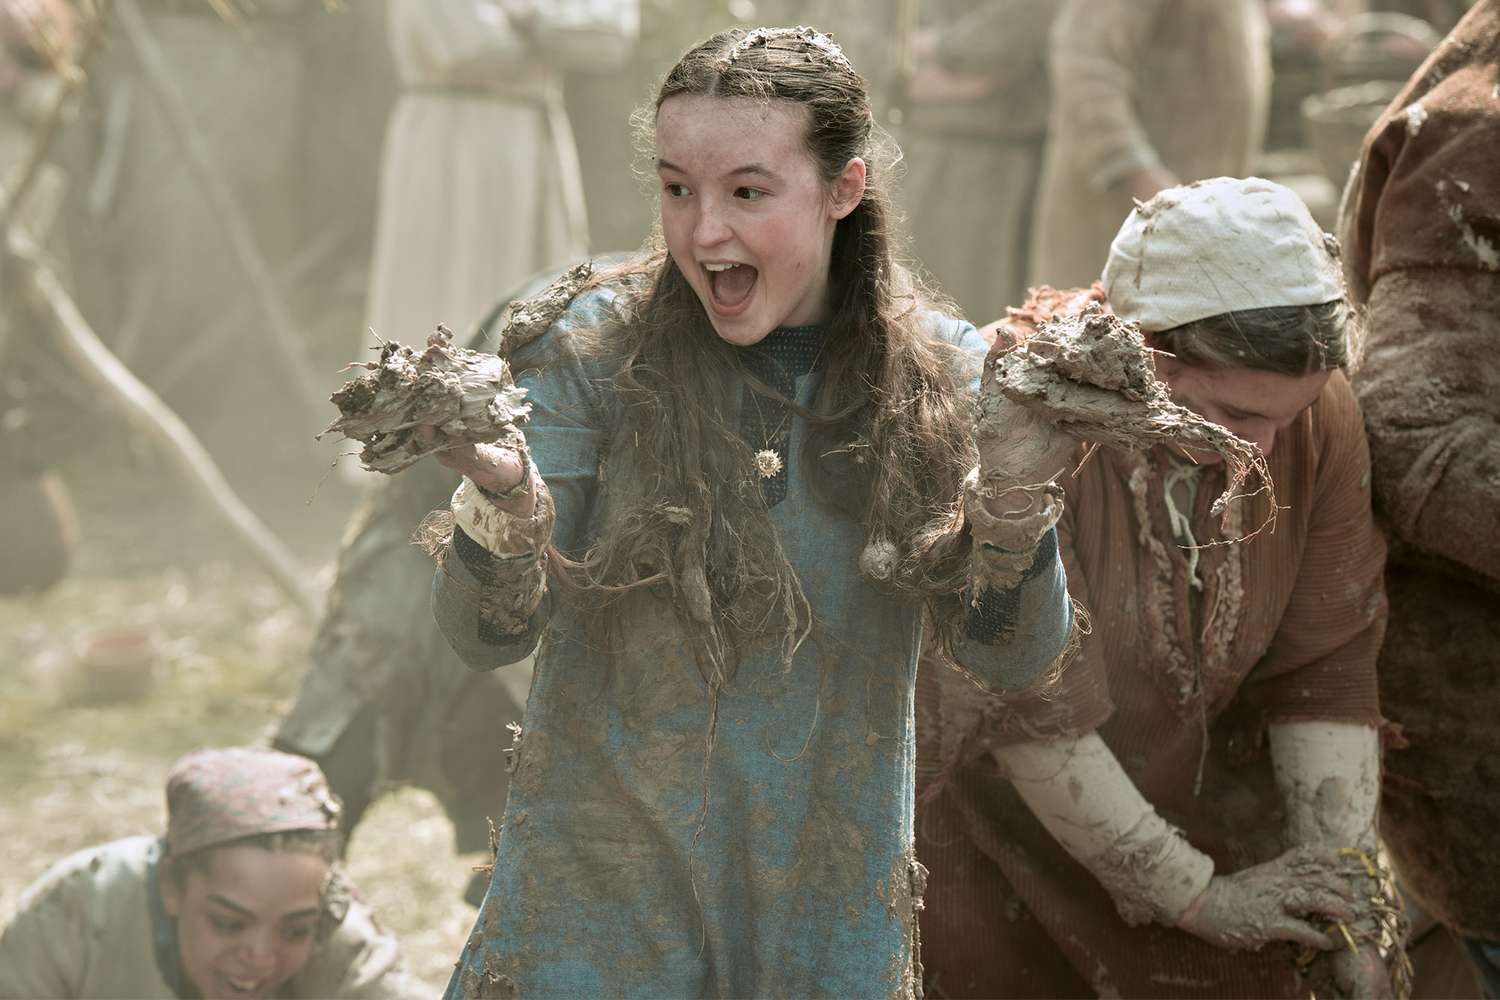 'Game of Thrones' alum Bella Ramsey says 'Catherine Called Birdy' is a far cry from Westeros